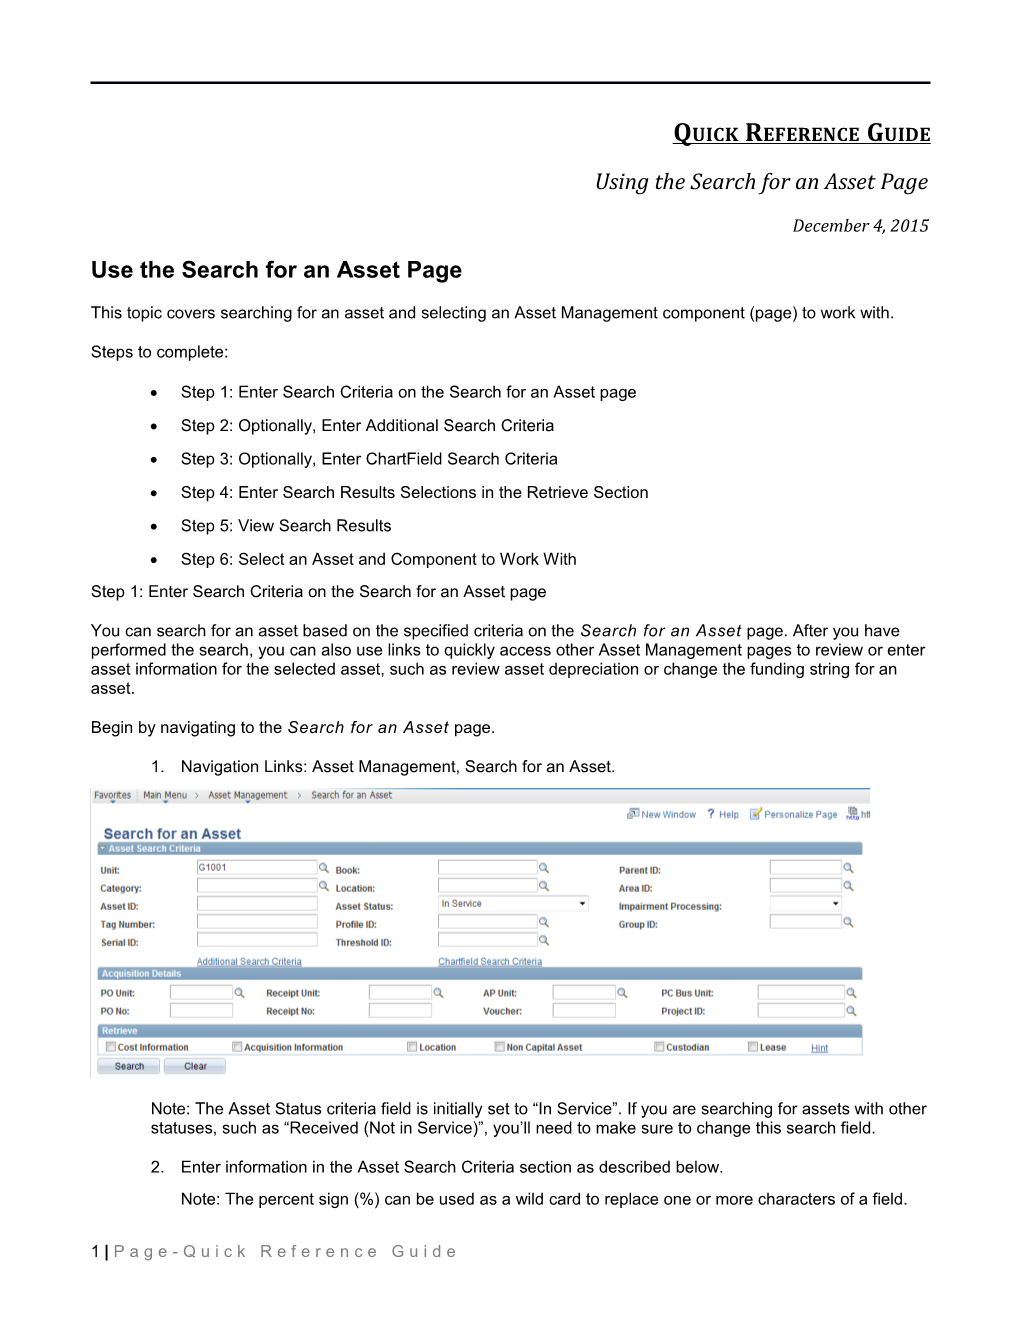 Using the Search for an Asset Page